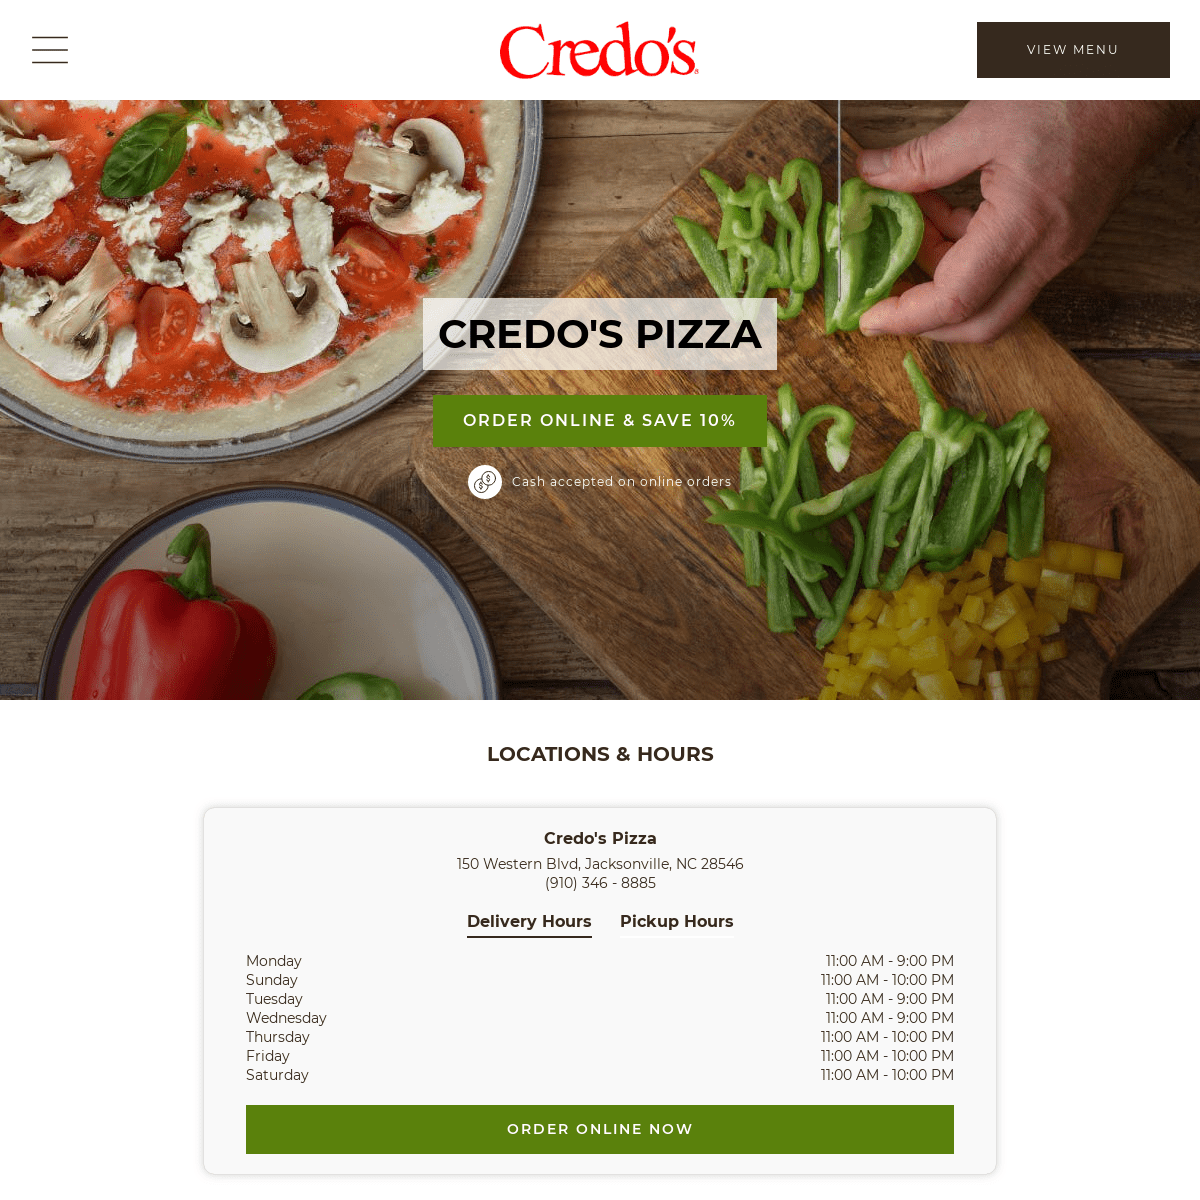 A complete backup of credospizza.com